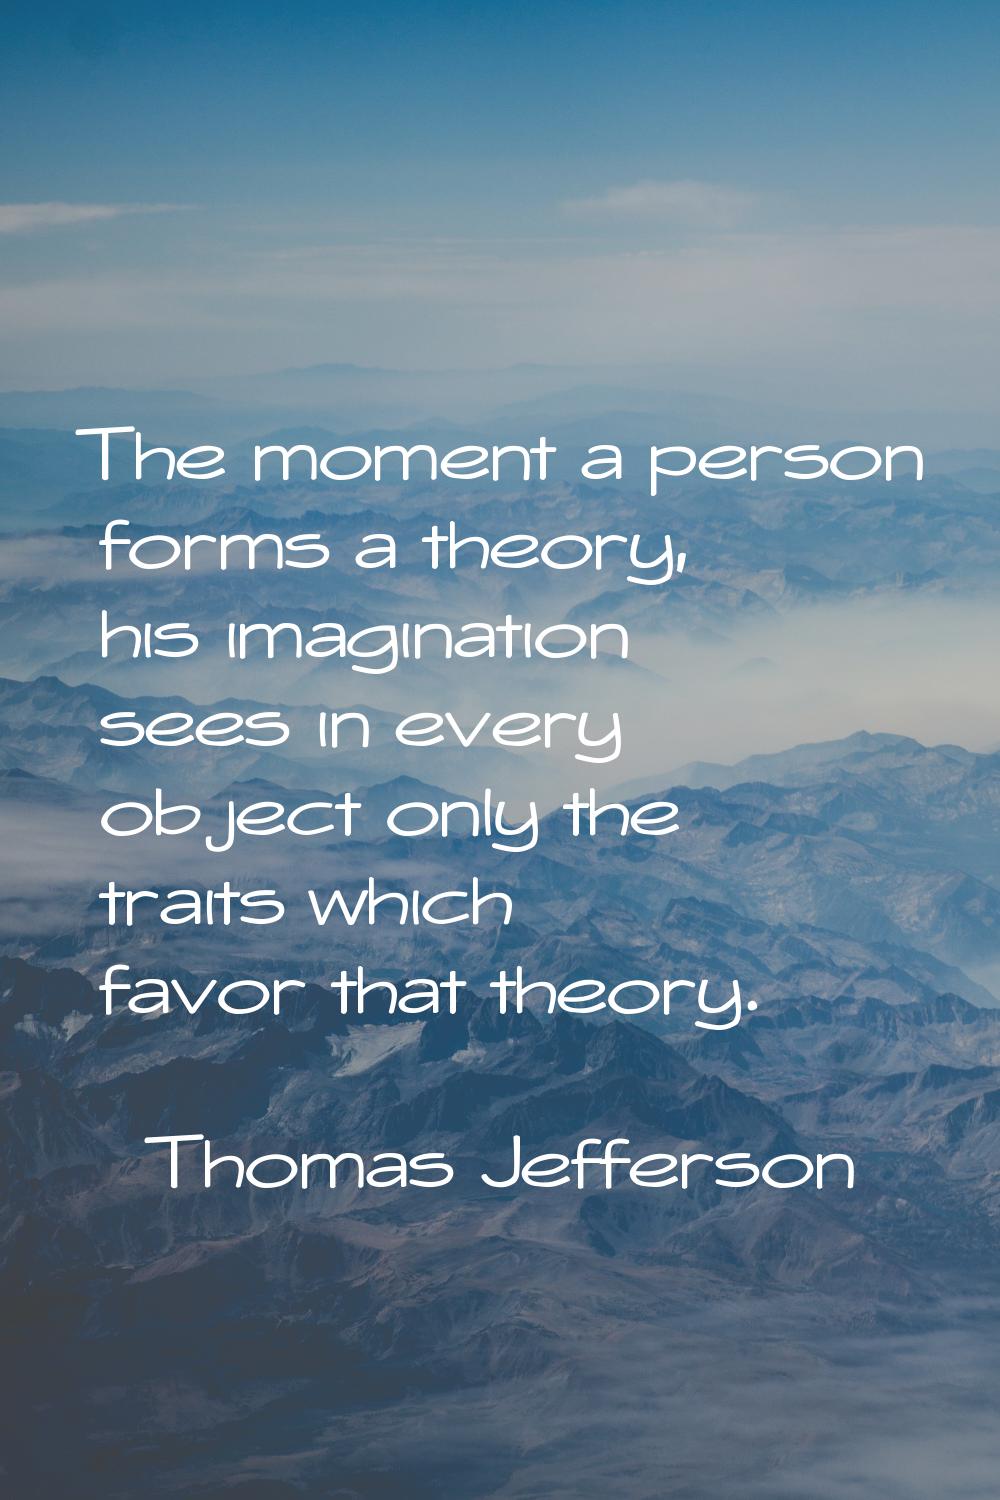 The moment a person forms a theory, his imagination sees in every object only the traits which favo